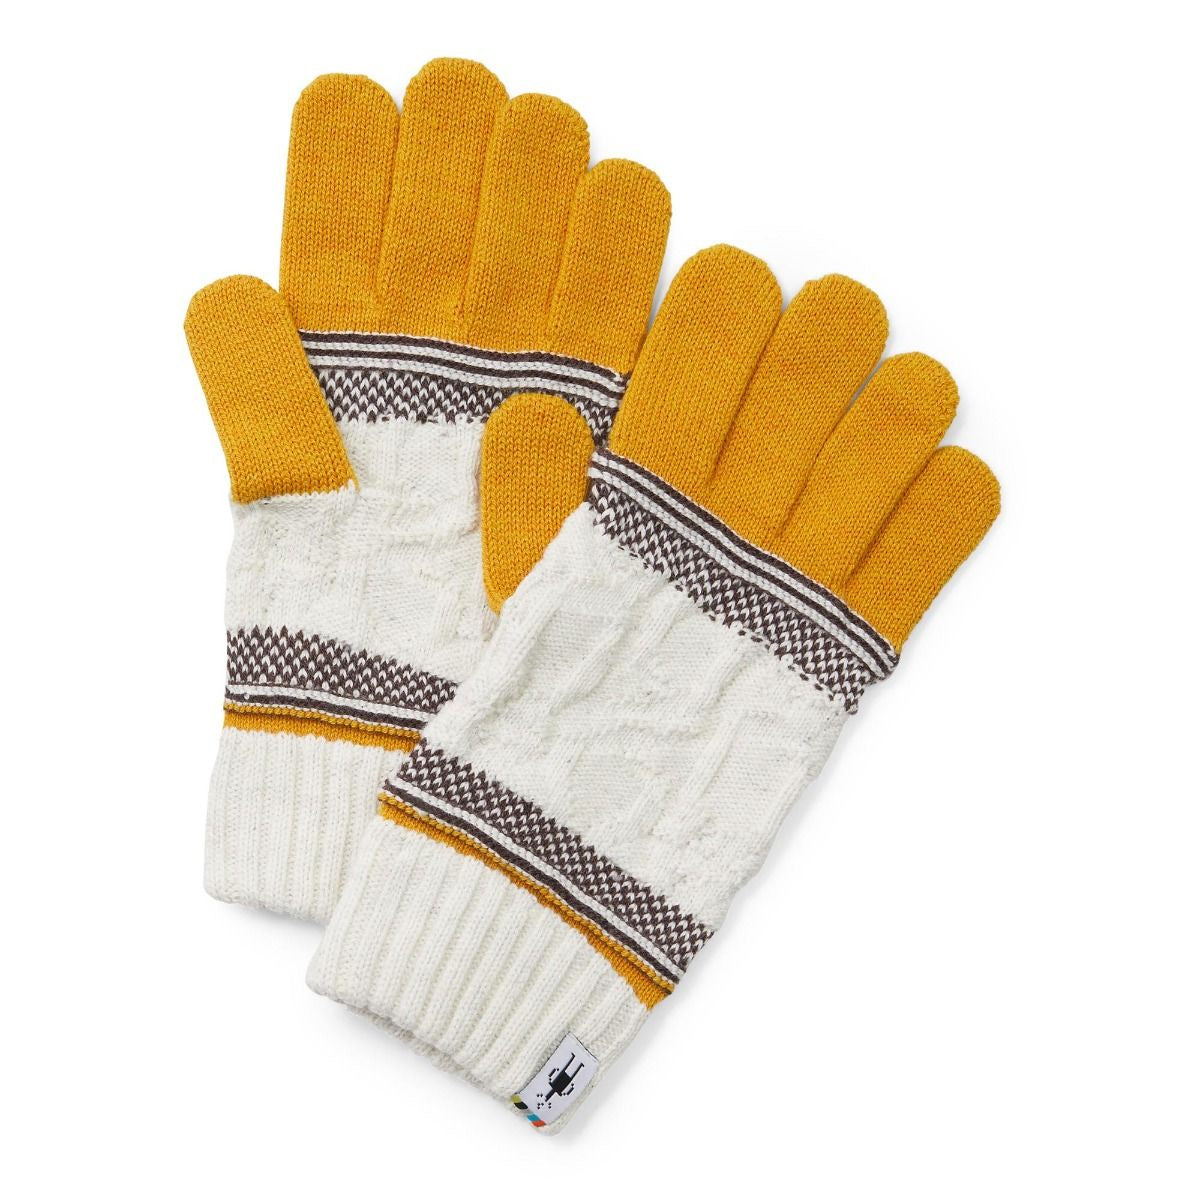 SMARTWOOL - POPCORN CABLE GLOVE IN HONEY GOLD